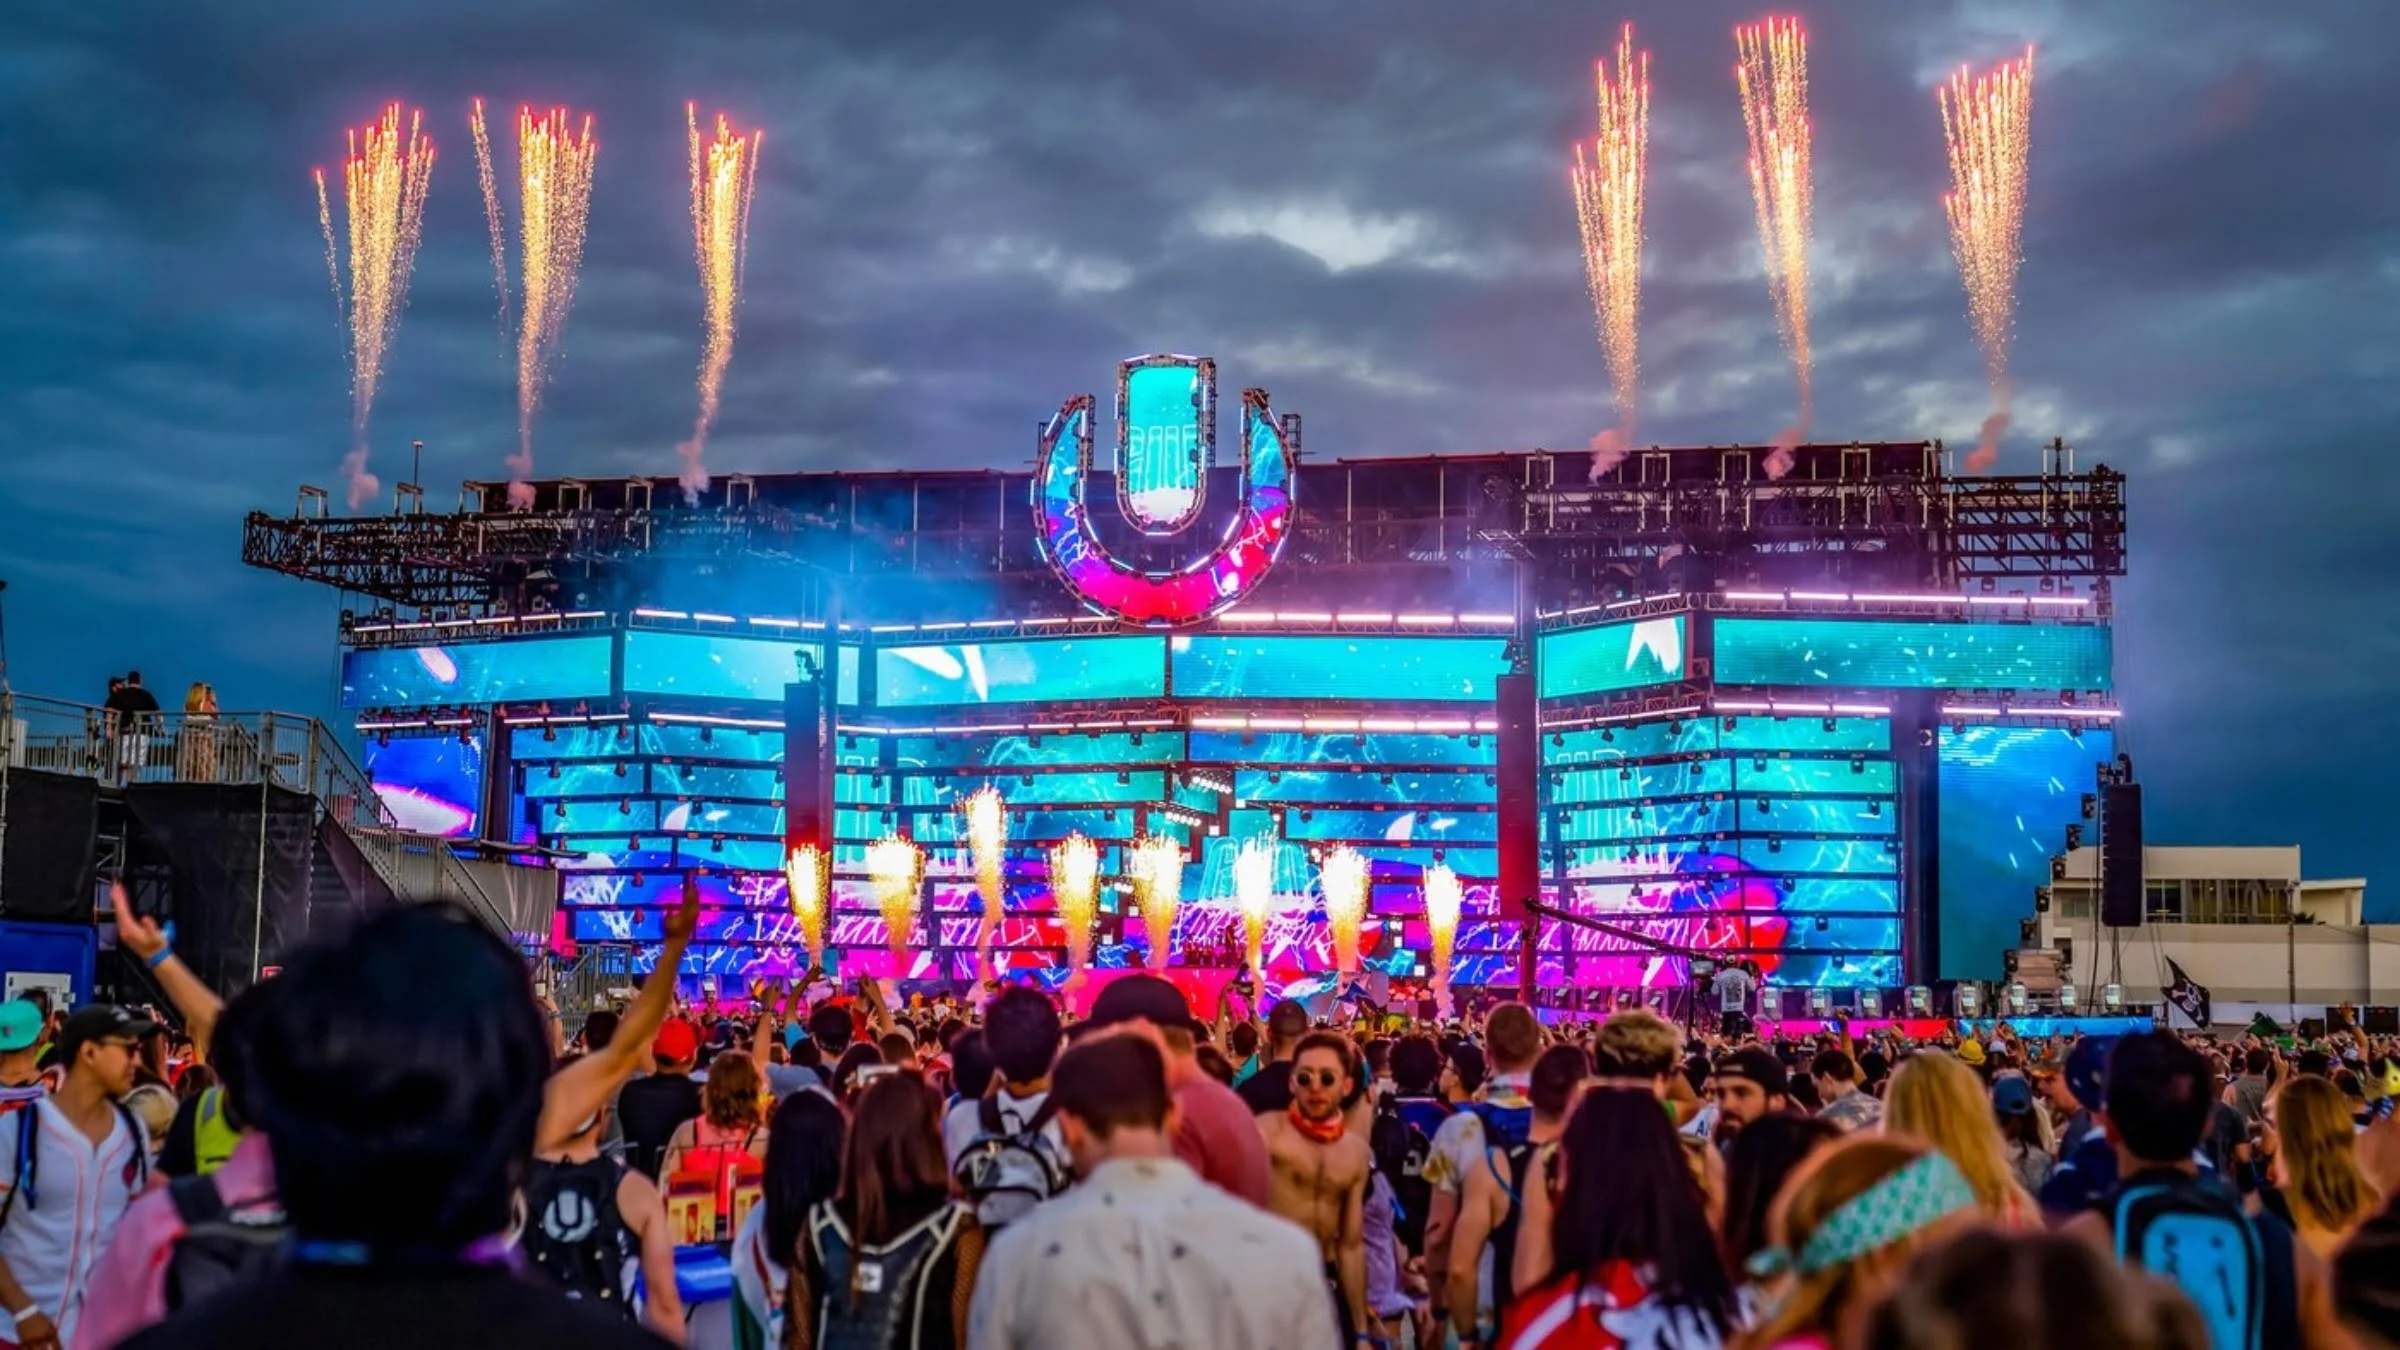 10 Reasons Why You Should Attend ULTRA Music Festival 2023 | Soundrive